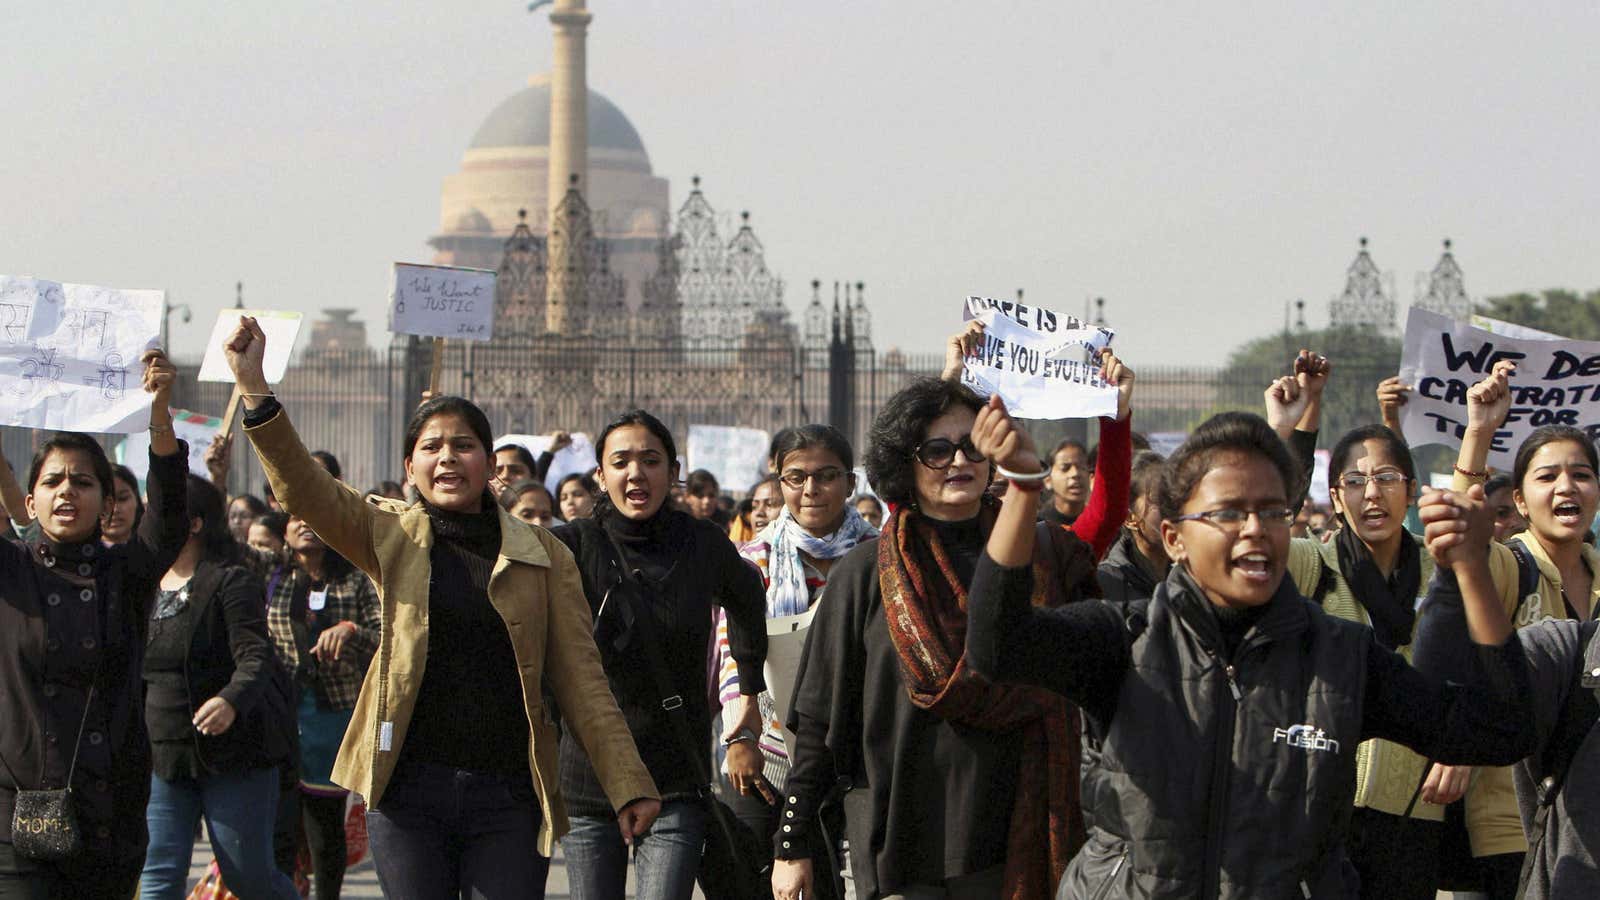 There have been protests every day in India’s capital since a woman was gang-raped on a bus.